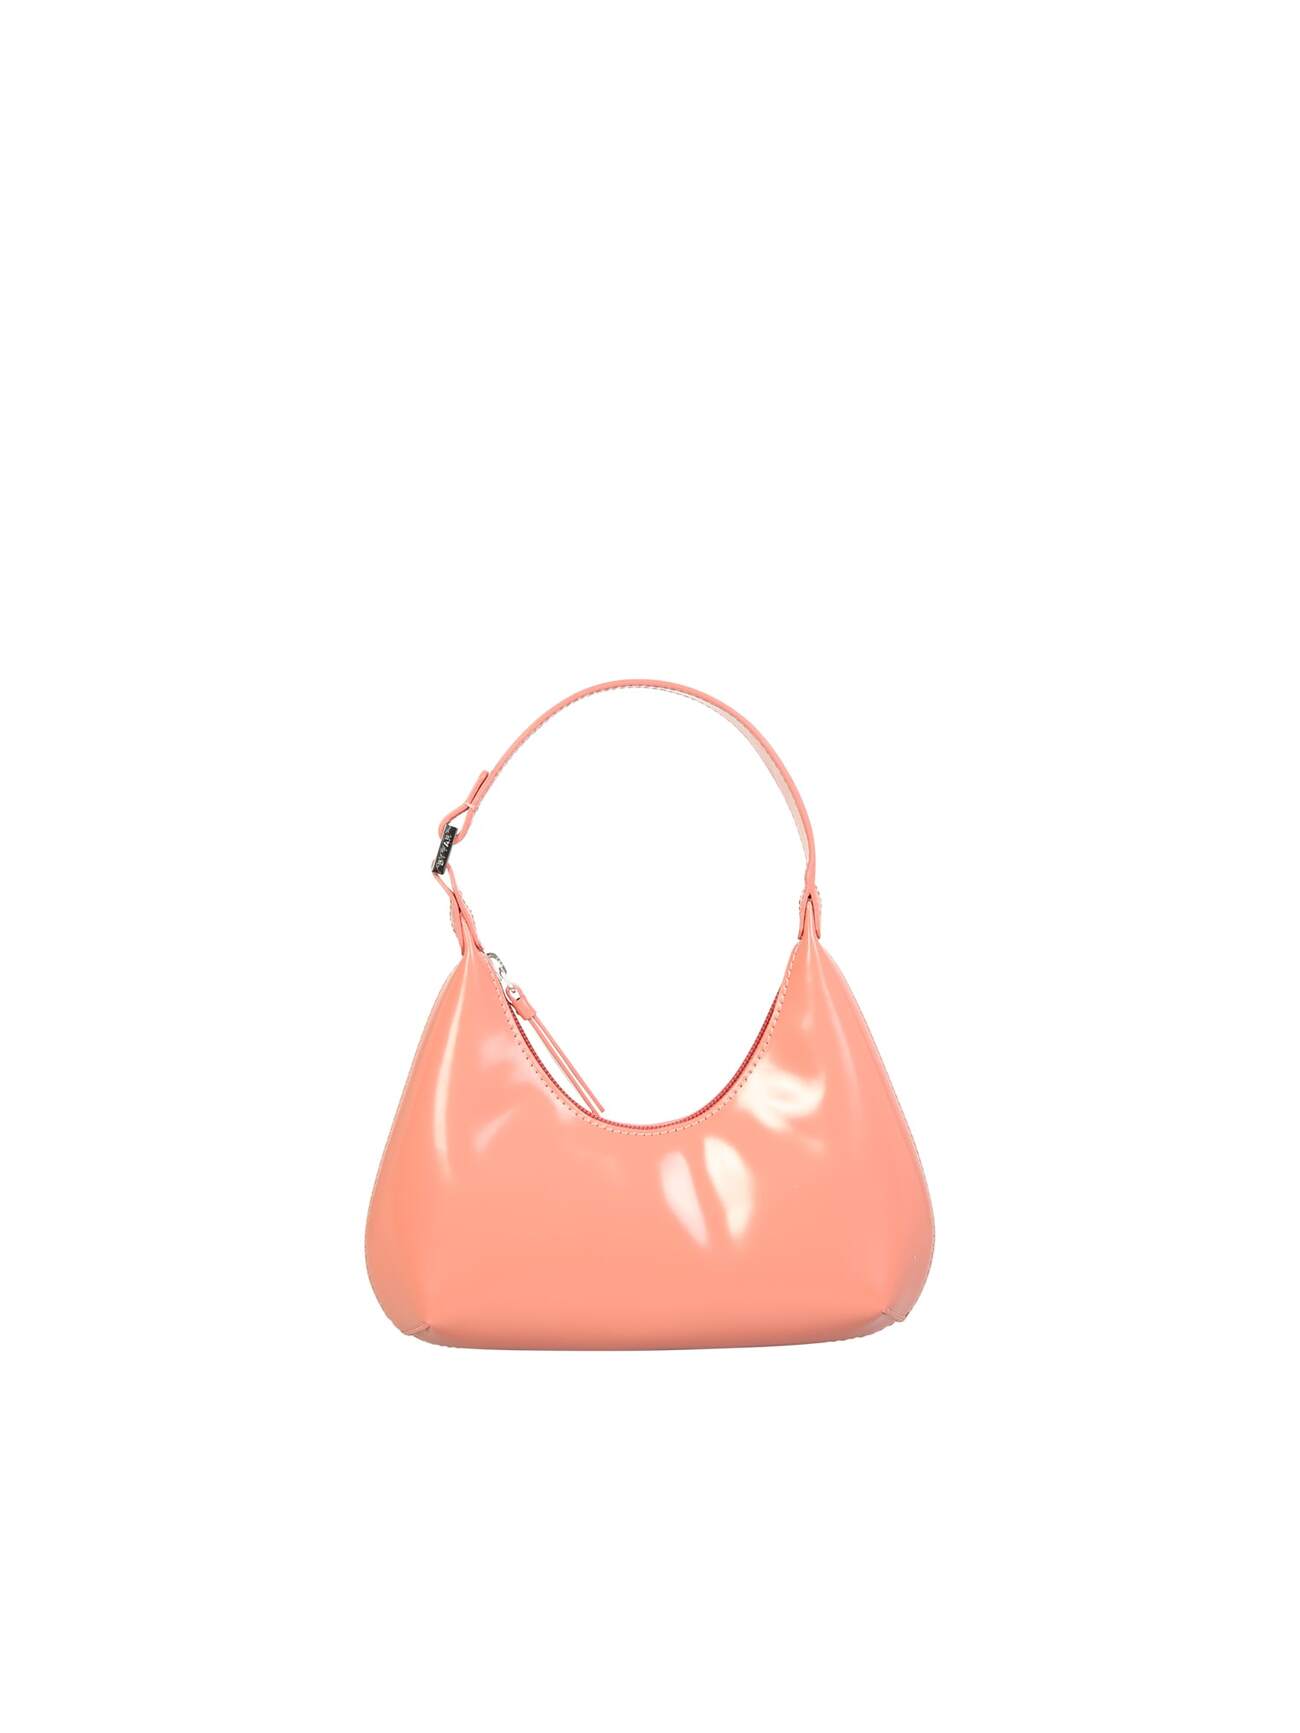 BY FAR Baby Salmon Semi Patent Leather Bag in pink